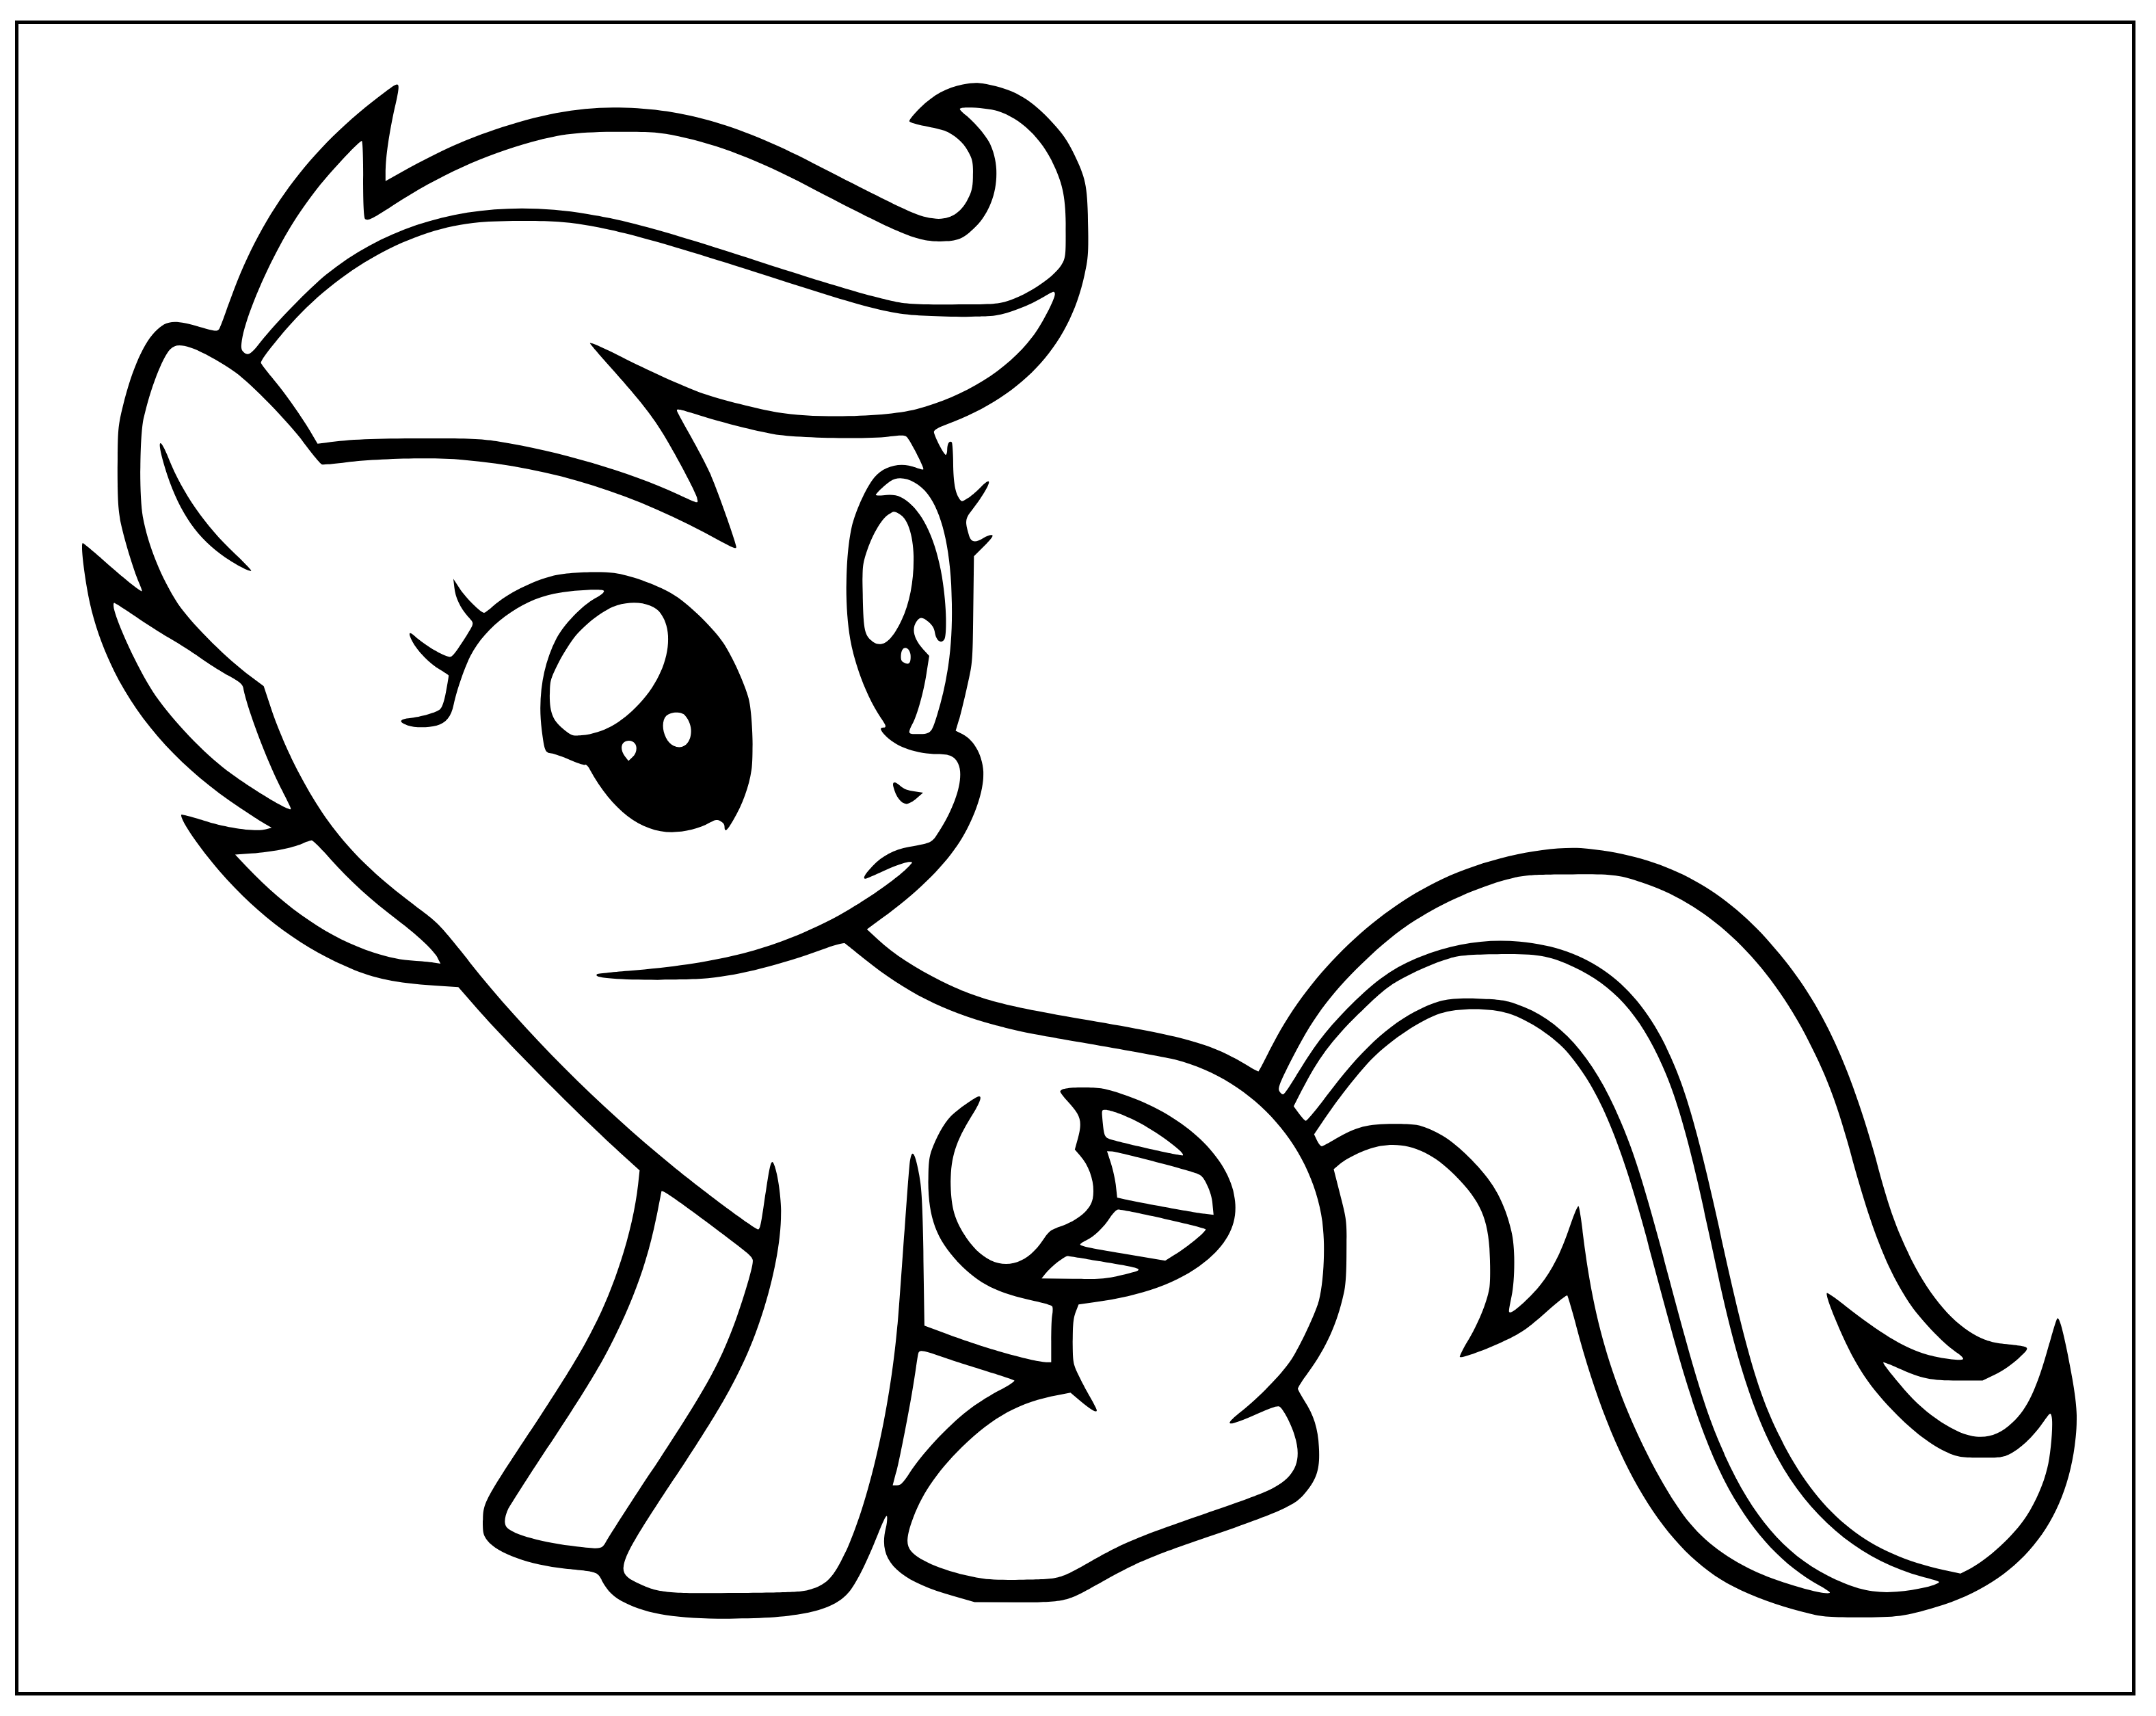 Printable Scootaloo Coloring Page for kids.